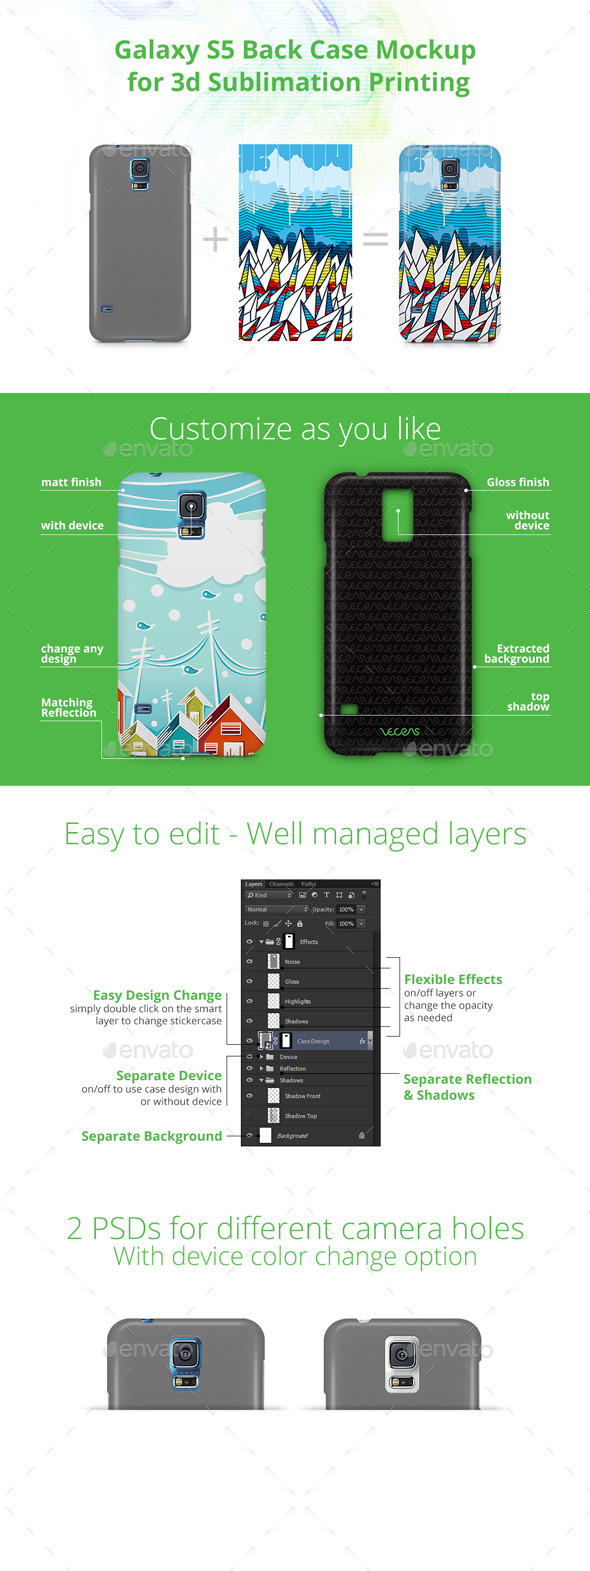 Galaxy S5 Case Design Mockup for 3d Sublimation Printing - Back View